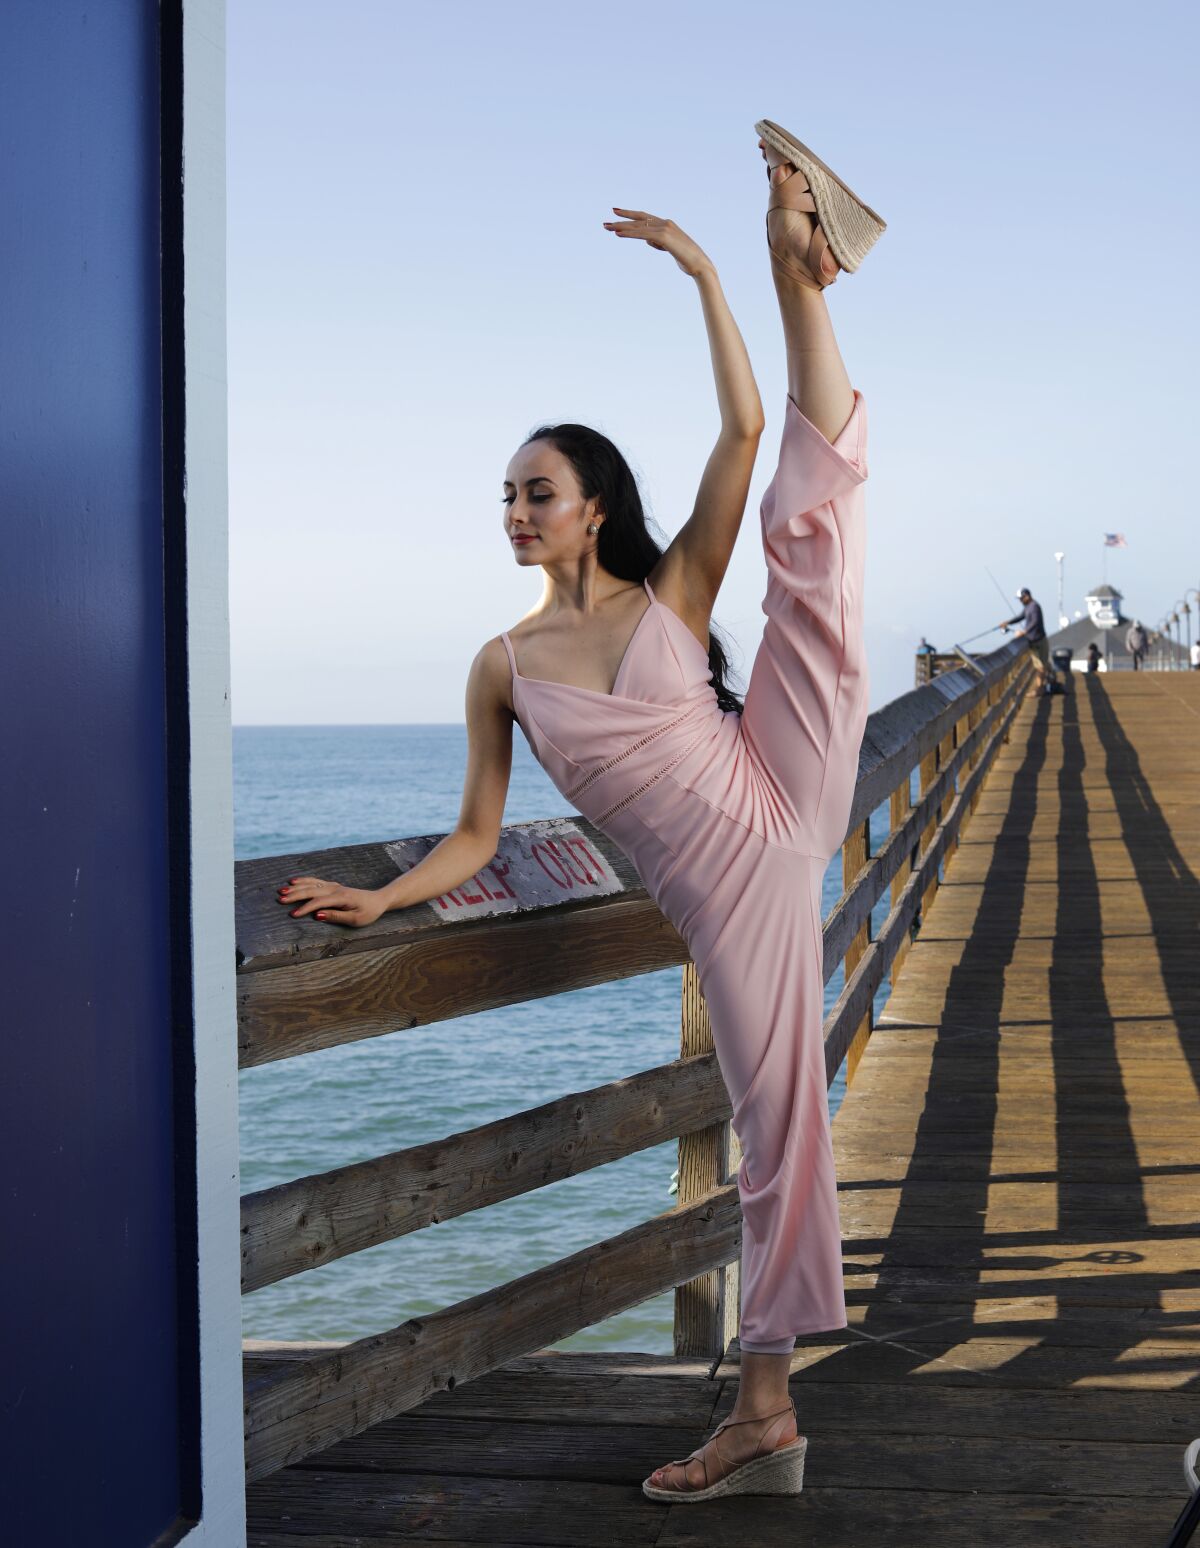 Ballet dancer Lori Hernandez, photographed at the Imperial Beach Pier on Nov. 24.